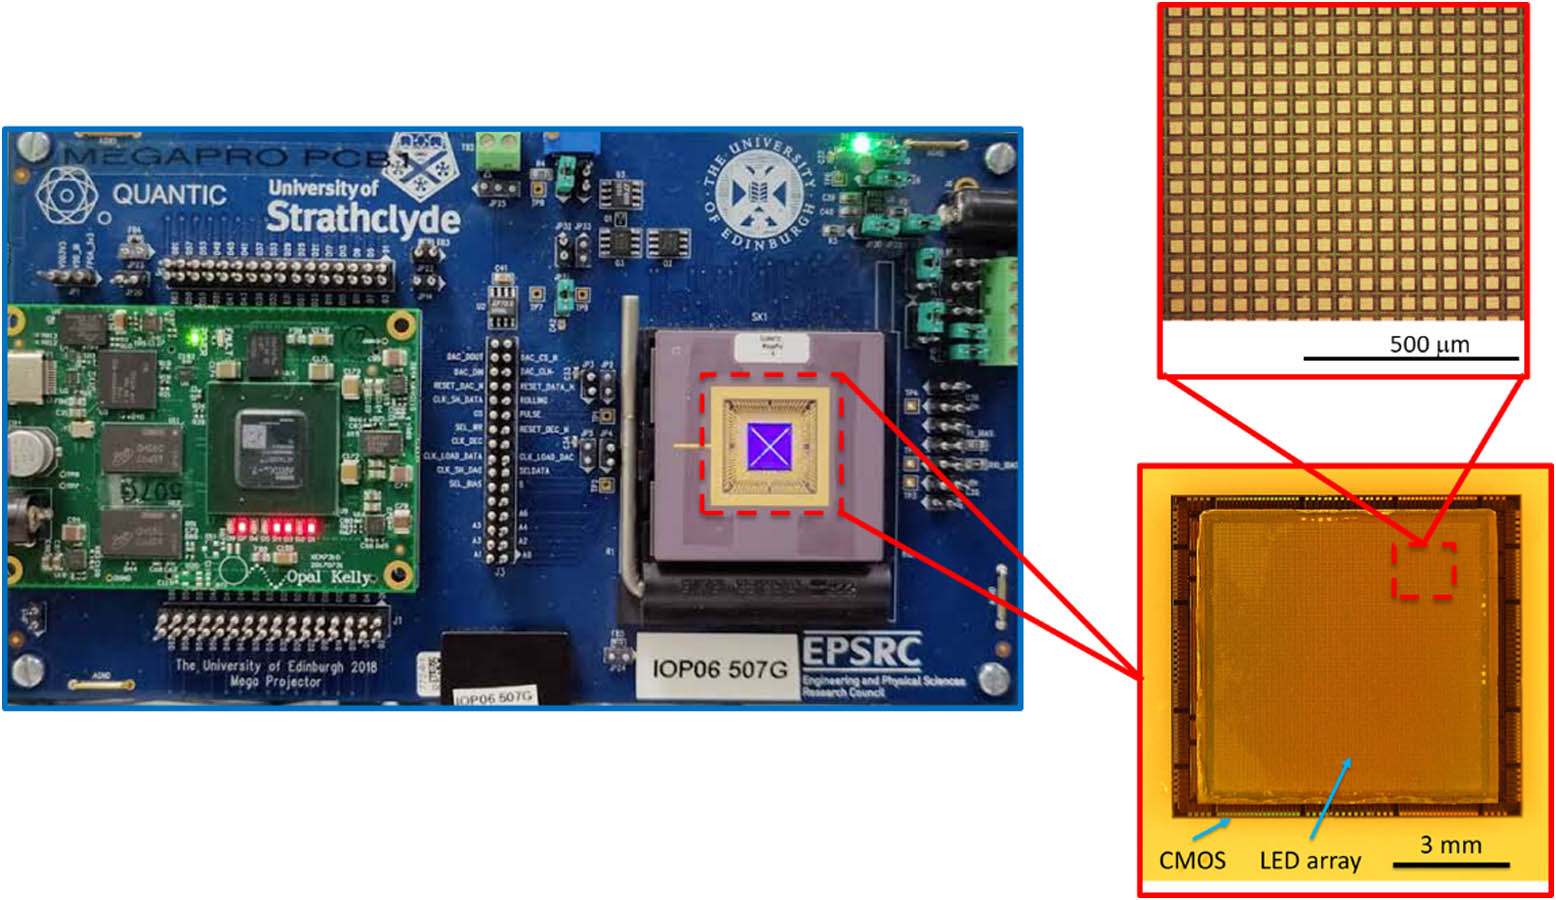 Photograph of the mounted LED projector on CMOS chip, co-packaged with an FPGA controller. The projector is here displaying a diagonal cross pattern. Magnified inset images show the mounted LED array on the CMOS chip and a zoomed view of the LED pixel contact pads, imaged through the sapphire substrate.